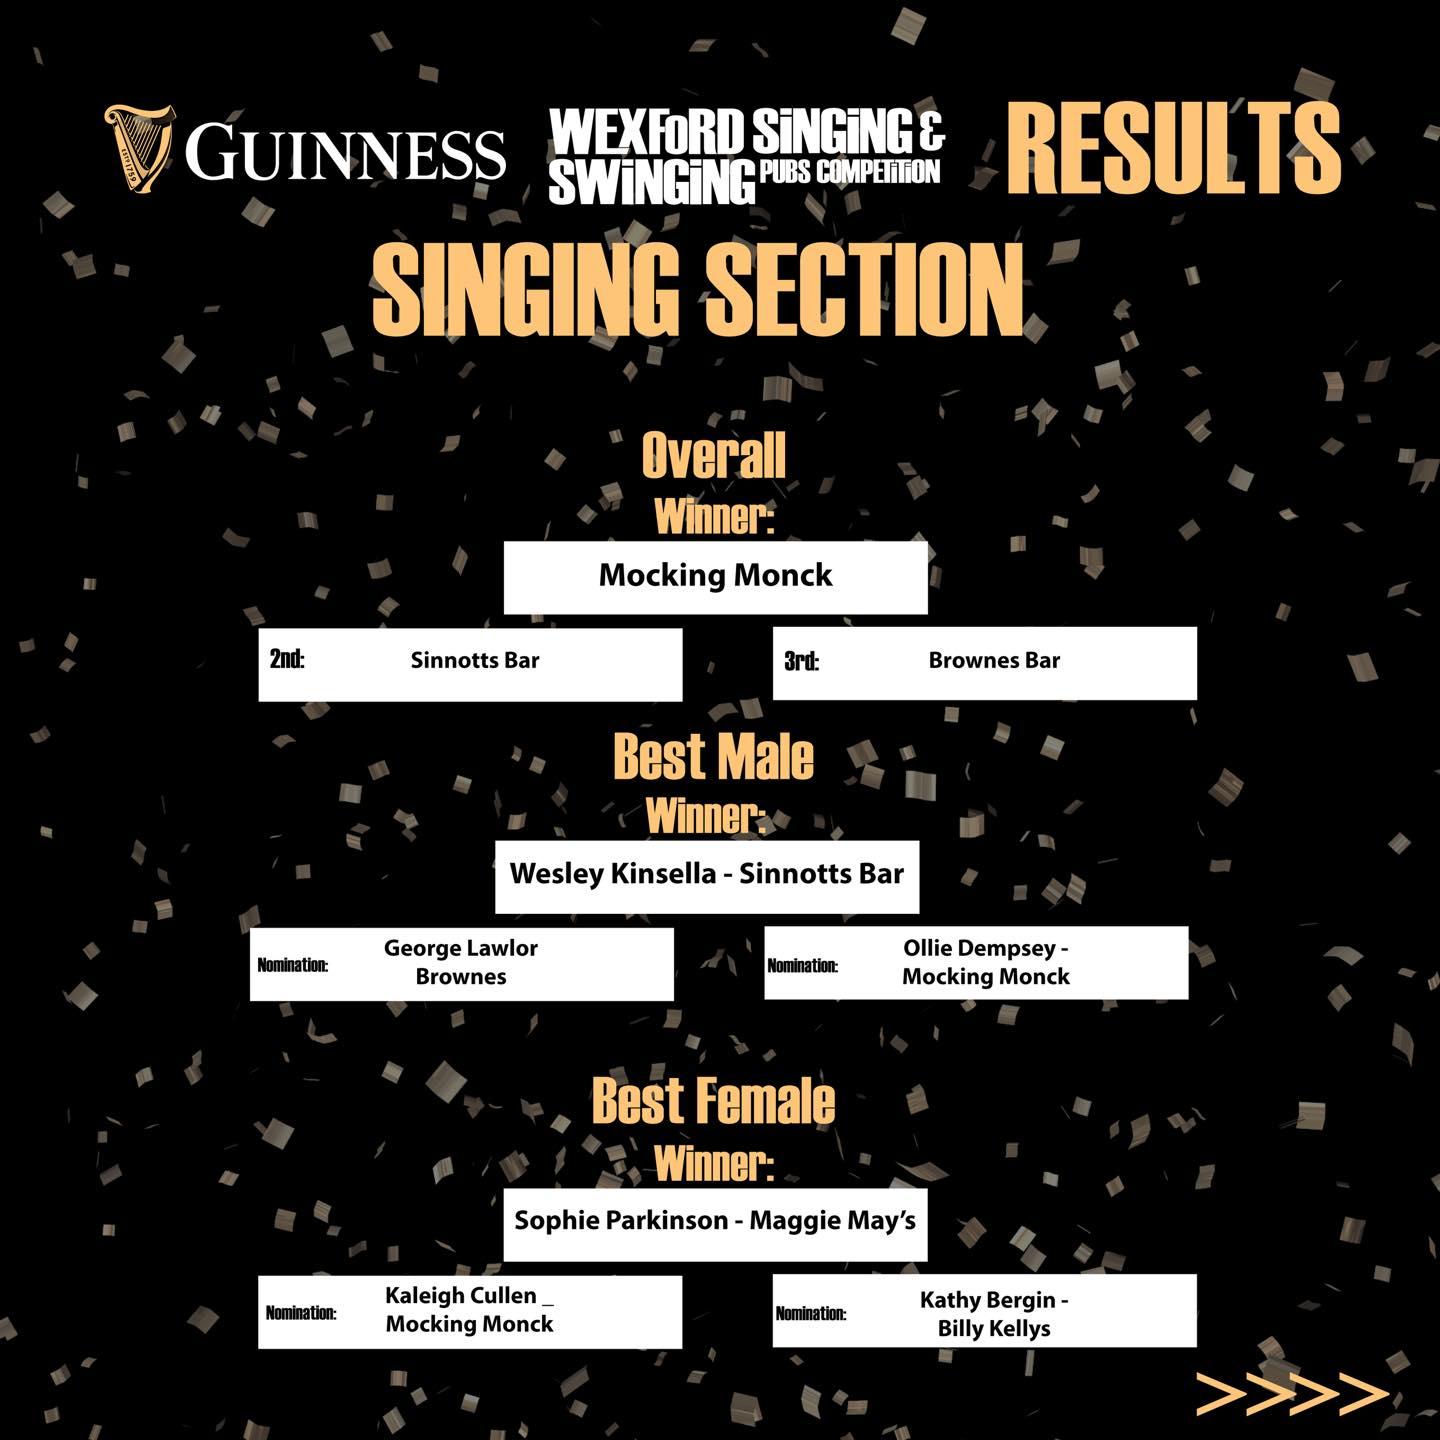 May be a graphic of harp and text that says 'GUINNESS SWiNGİNGP PUBS COMPETITION WEXFORD SINGINGE RESULTS SINGING SECTION Overall Winner: Mocking Monck 2nd Sinnotts Bar 3rd: Brownes Bar Best Male Winner: Wesley Kinsella Sinnotts Bar George Lawlor Brownes Nomination: Ollie Dempsey Mocking Monck Best Female Winner- Nomination: Sophie Parkinson Maggie May's Kaleigh Cullen Mocking Monck Kathy Bergin- Billy Kellys >>>>'”>



<p><img loading=